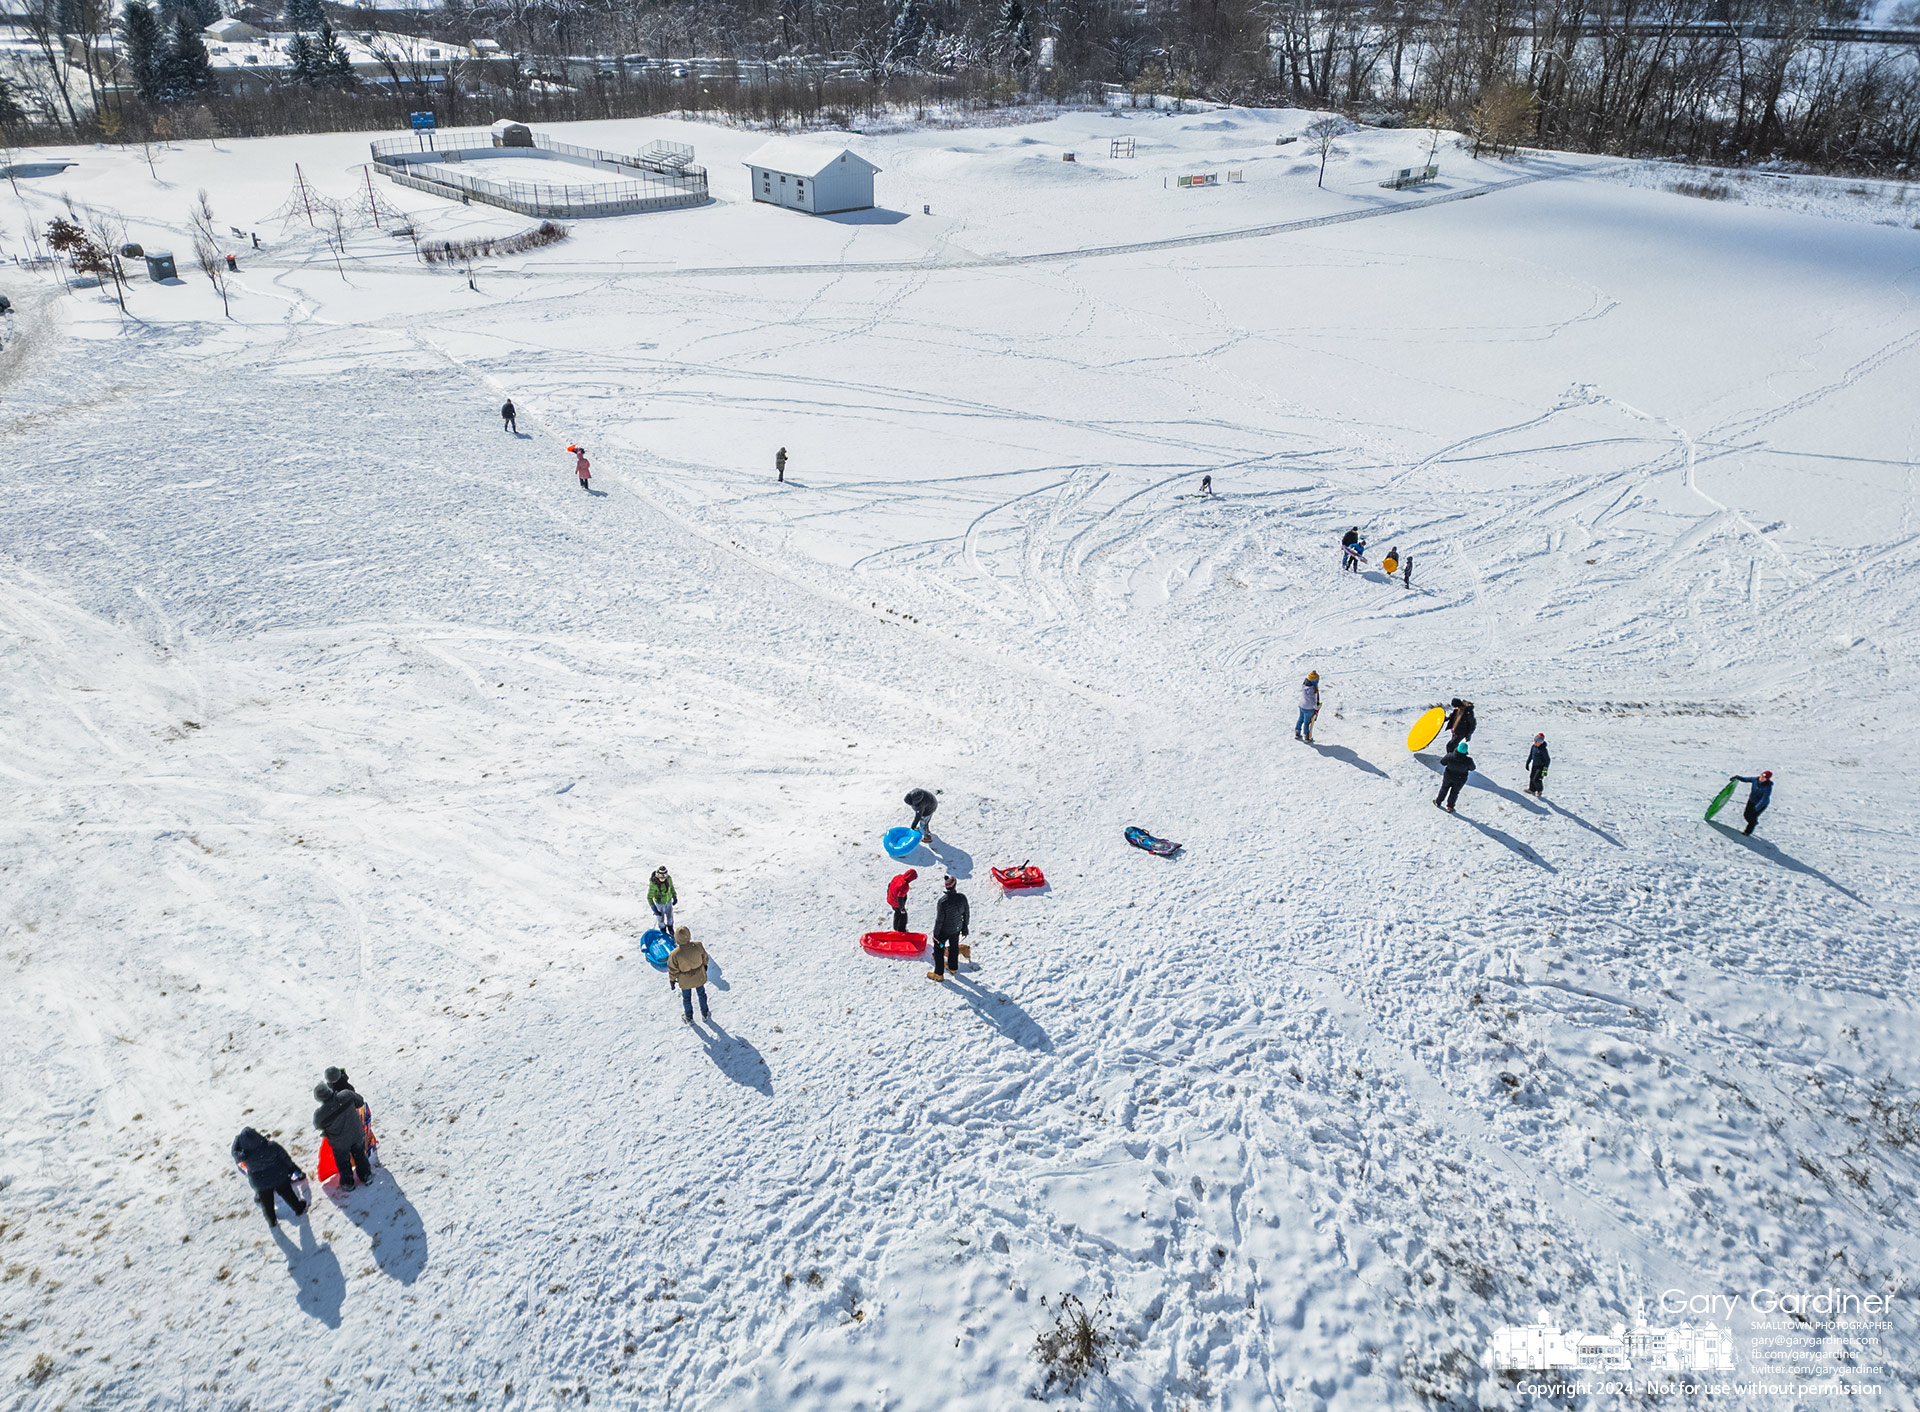 Sledders gather at the top of the snow-covered hill at Alum Creek Park South after an overnight storm brought seven inches of snow to central Ohio. My Final Photo for February 17, 2024.